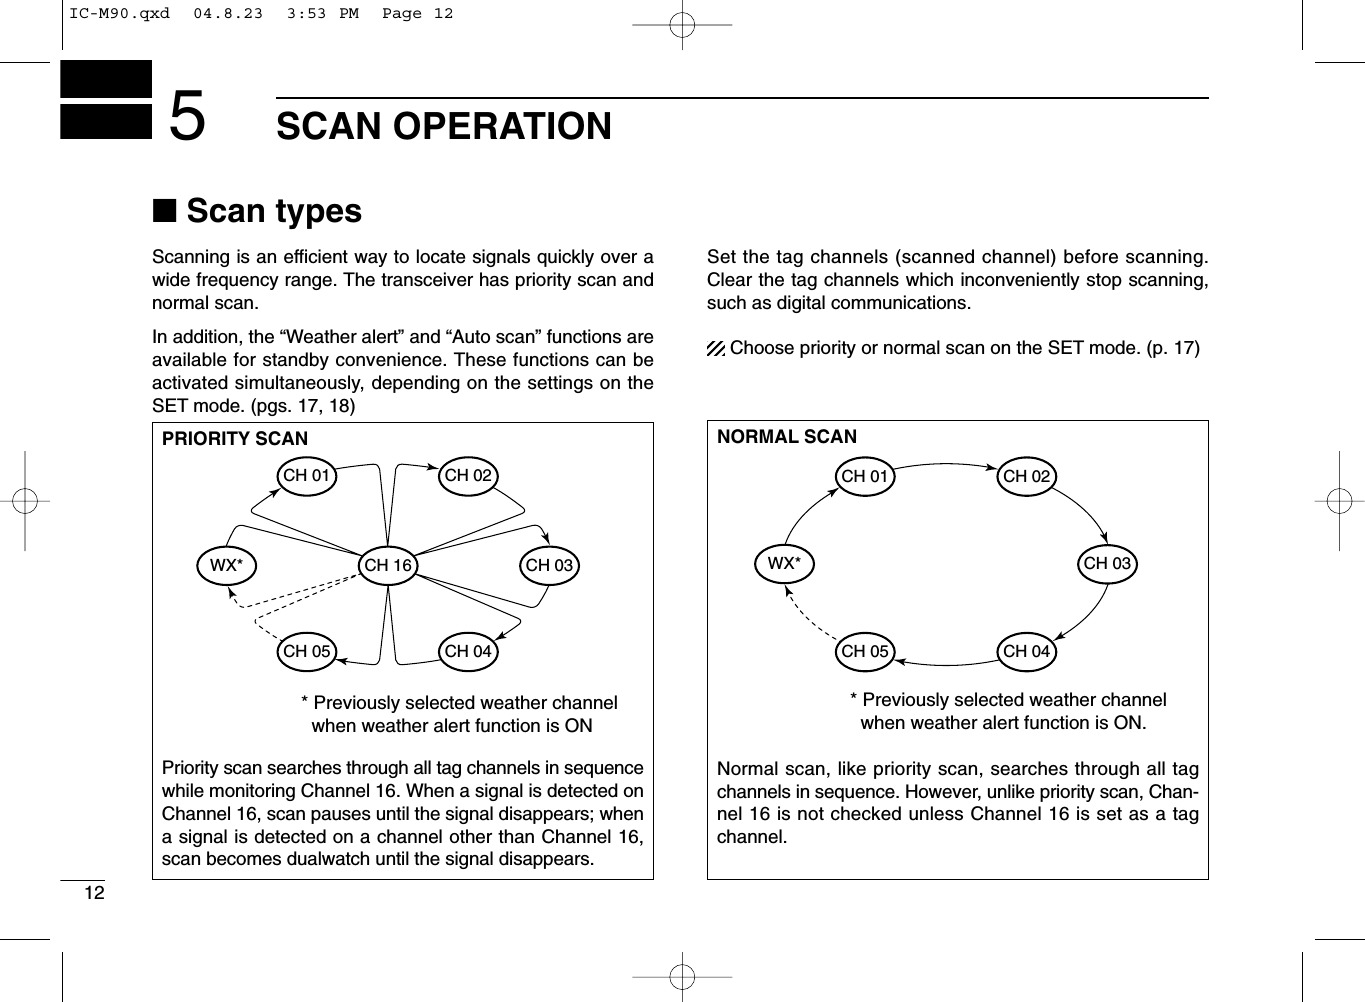 12SCAN OPERATION5■Scan typesScanning is an efﬁcient way to locate signals quickly over awide frequency range. The transceiver has priority scan andnormal scan.In addition, the “Weather alert” and “Auto scan” functions areavailable for standby convenience. These functions can beactivated simultaneously, depending on the settings on theSET mode. (pgs. 17, 18)Set the tag channels (scanned channel) before scanning.Clear the tag channels which inconveniently stop scanning,such as digital communications.Choose priority or normal scan on the SET mode. (p. 17)PRIORITY SCANPriority scan searches through all tag channels in sequencewhile monitoring Channel 16. When a signal is detected onChannel 16, scan pauses until the signal disappears; whena signal is detected on a channel other than Channel 16,scan becomes dualwatch until the signal disappears.WX*CH 01CH 16CH 02CH 05 CH 04CH 03* Previously selected weather channel   when weather alert function is ONNORMAL SCANNormal scan, like priority scan, searches through all tagchannels in sequence. However, unlike priority scan, Chan-nel 16 is not checked unless Channel 16 is set as a tagchannel.CH 01 CH 02WX*CH 05 CH 04CH 03* Previously selected weather channel   when weather alert function is ON.IC-M90.qxd  04.8.23  3:53 PM  Page 12